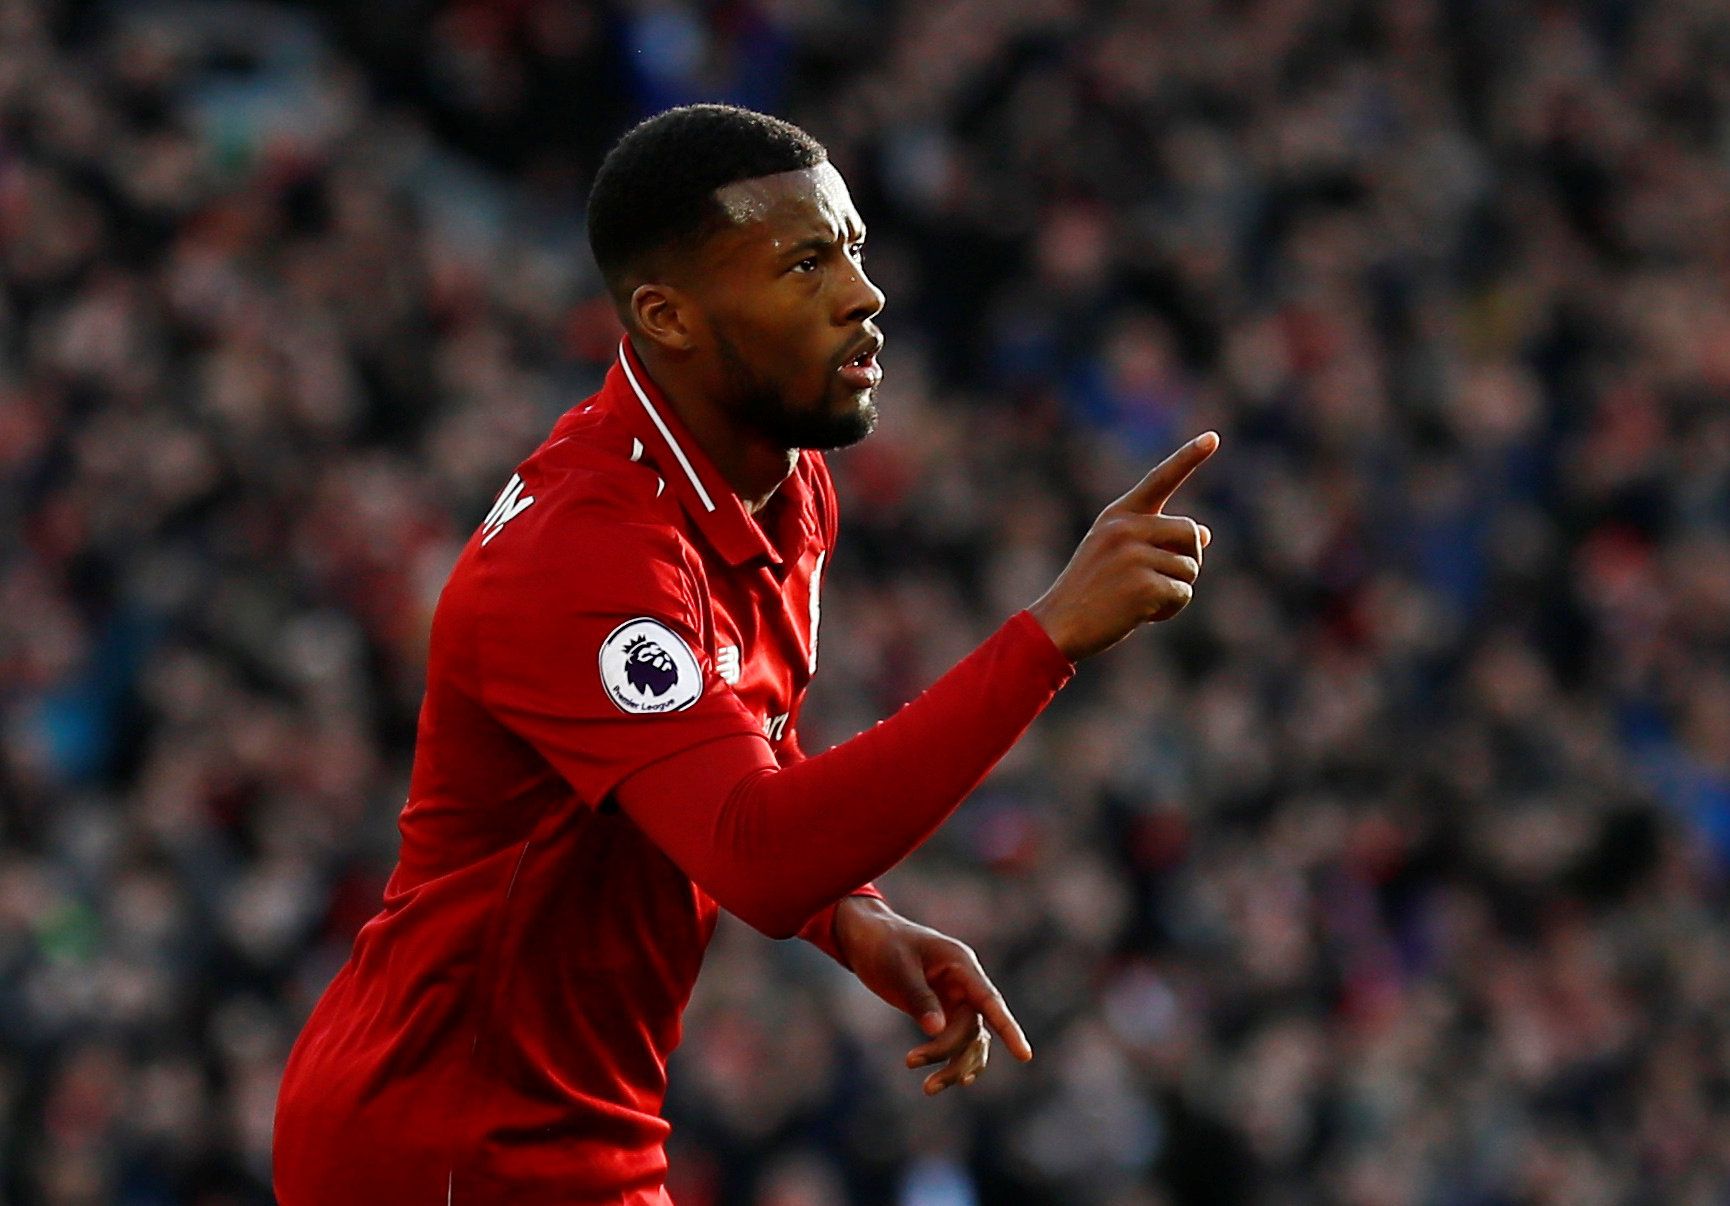 Soccer Football - Premier League - Liverpool v AFC Bournemouth - Anfield, Liverpool, Britain - February 9, 2019  Liverpool's Georginio Wijnaldum celebrates scoring their second goal        Action Images via Reuters/Jason Cairnduff  EDITORIAL USE ONLY. No use with unauthorized audio, video, data, fixture lists, club/league logos or 